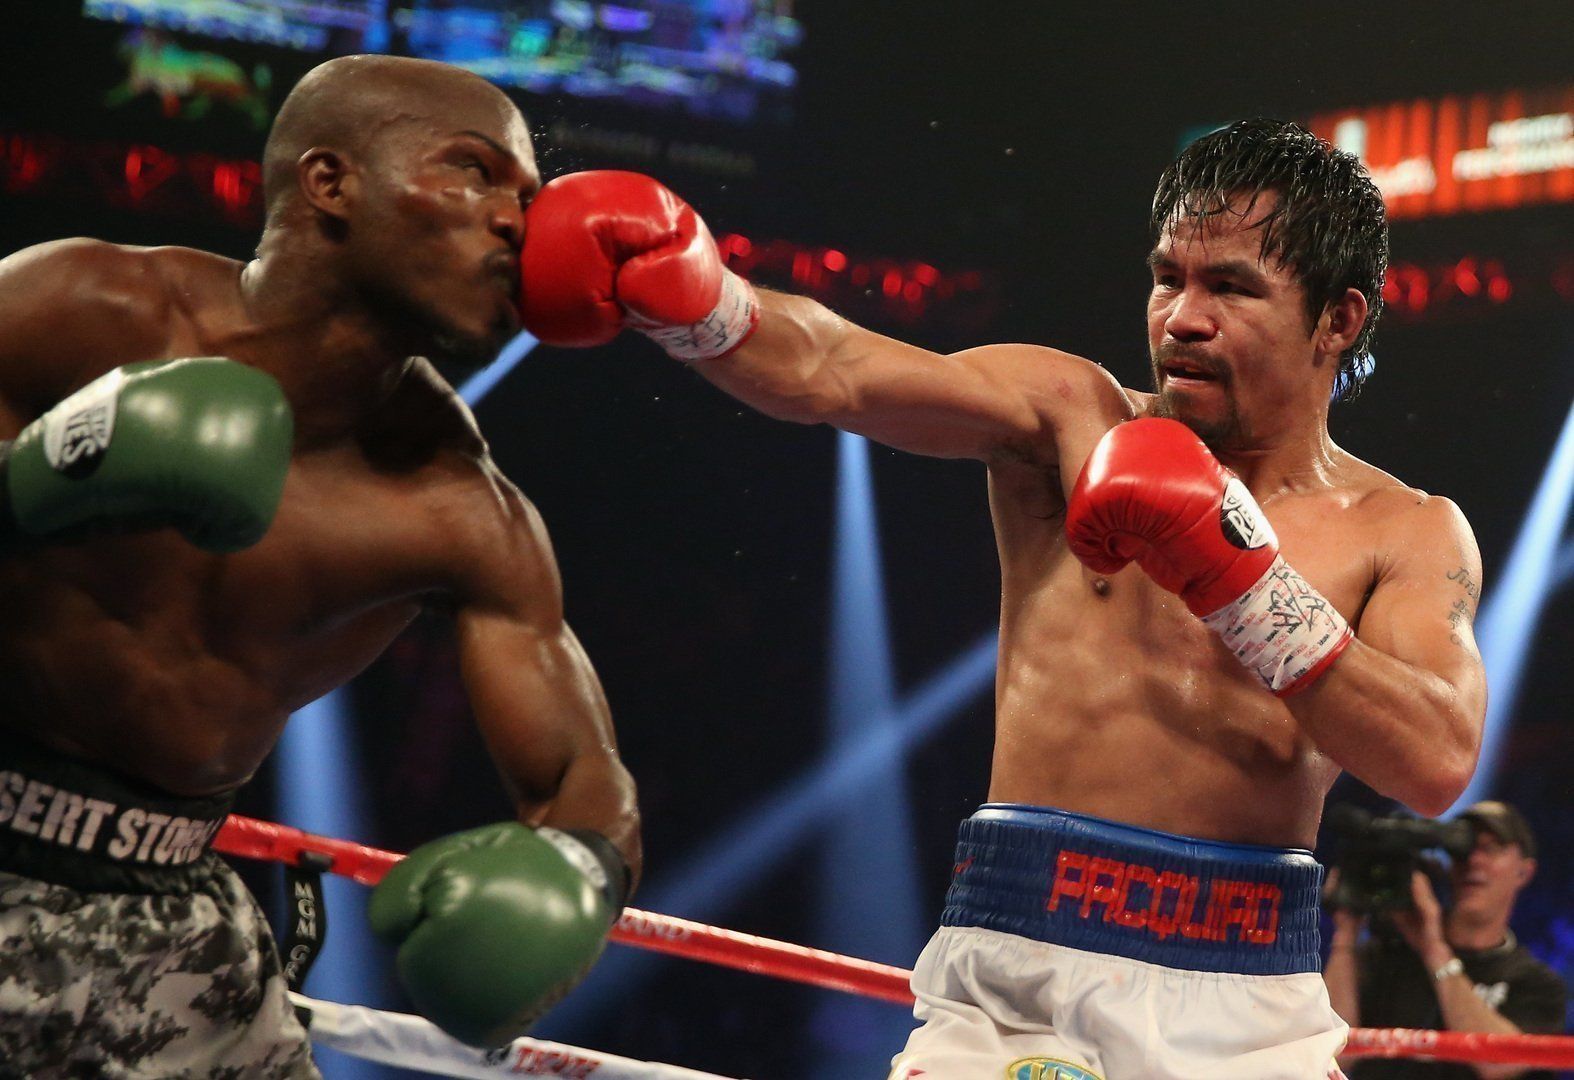 LAS VEGAS, NV - APRIL 12: Manny Pacquiao throws a right hand at Timothy Bradley at the MGM Grand Garden Arena on April 12, 2014 in Las Vegas, Nevada. (Photo by Jeff Gross/Getty Images)